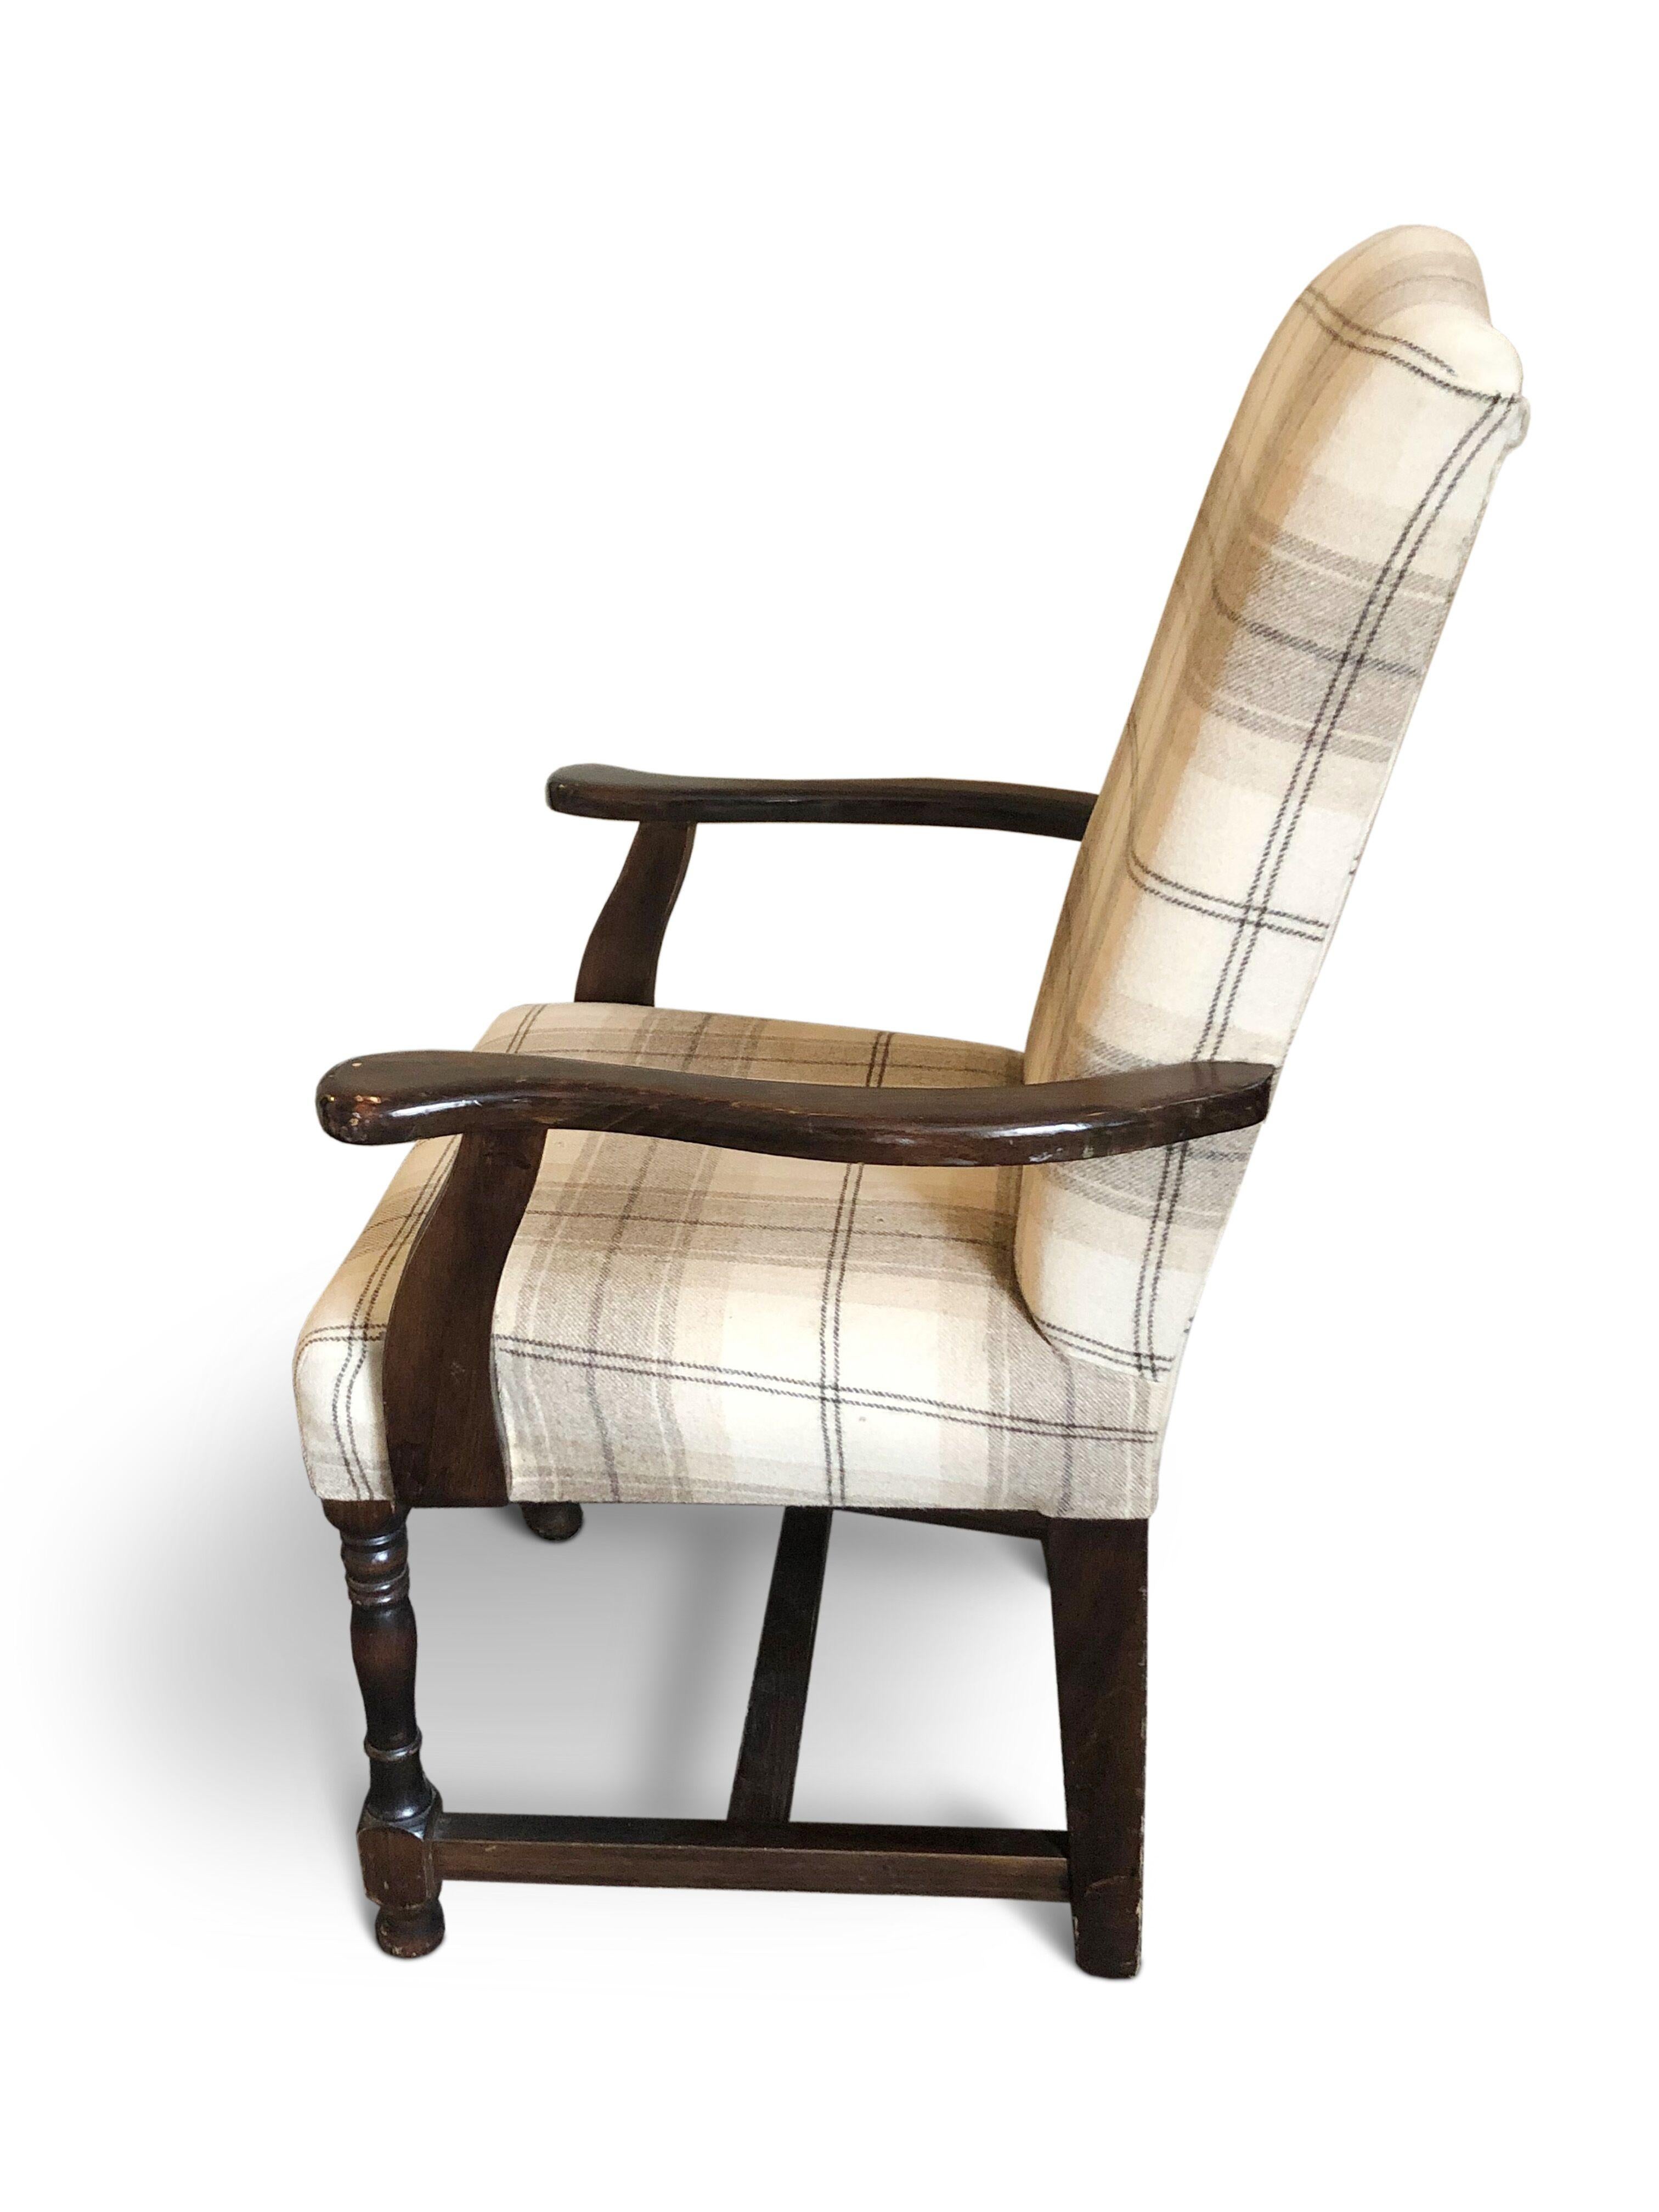 A long set of 20 upholstered camel back dining chairs (12 singles and 8 carvers)
Upholstered in a light tartan design fabric over dark oak frames with stretchers.